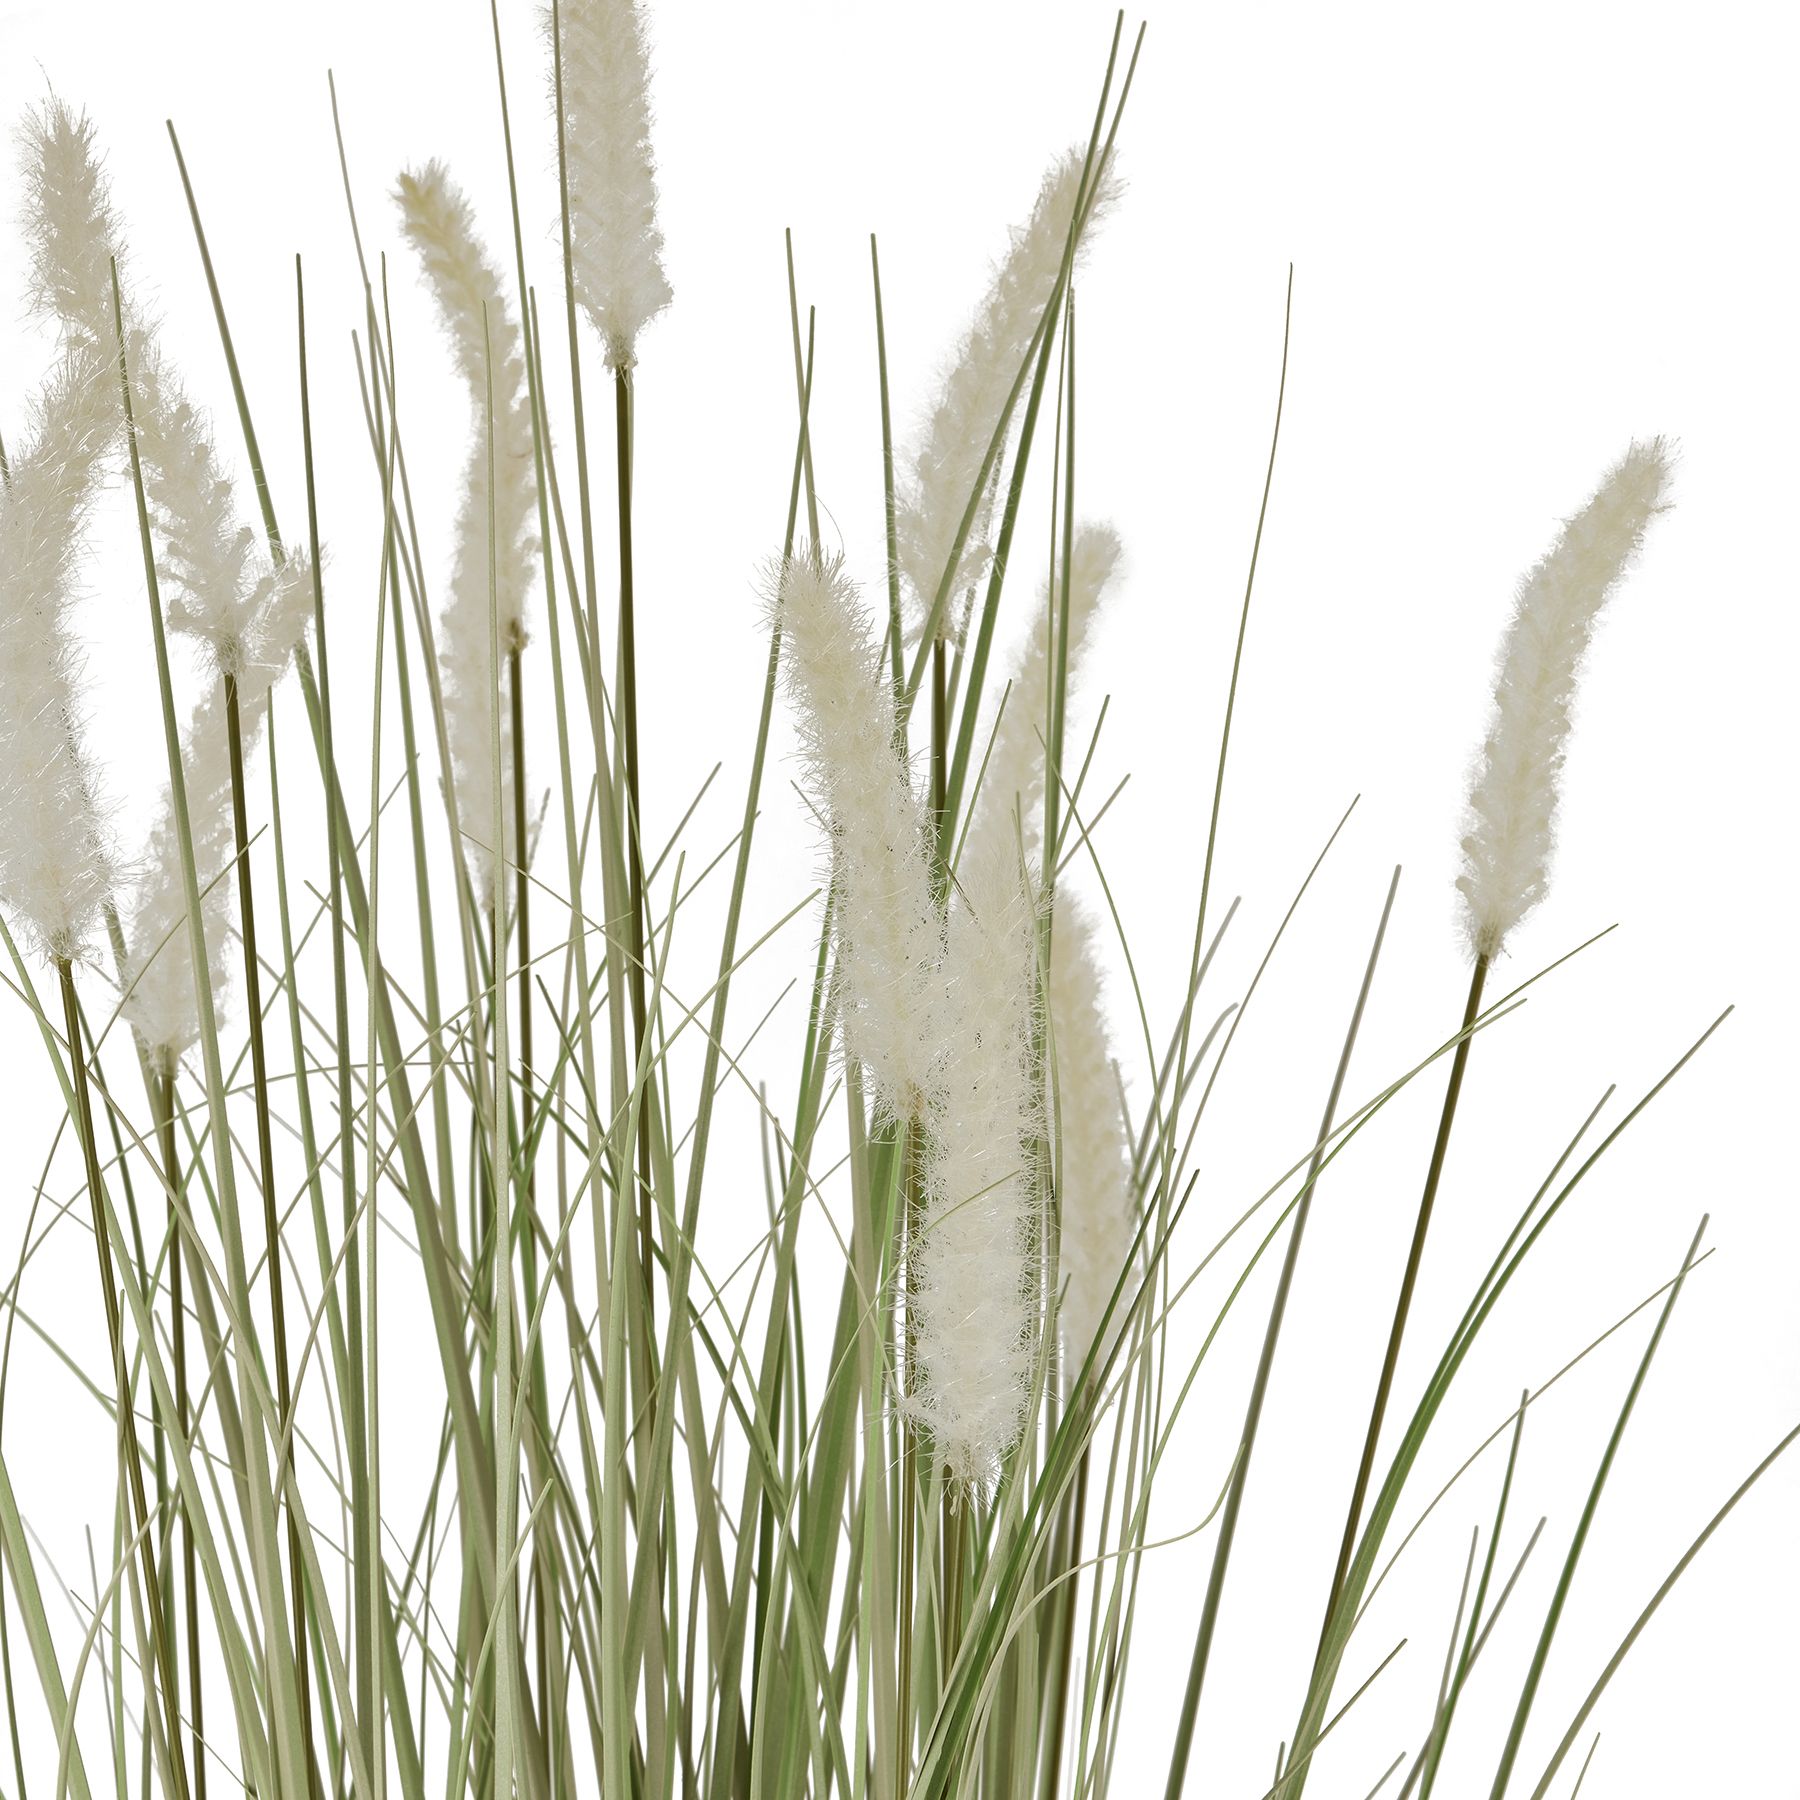 Large Bunny Tail Grass - Image 2